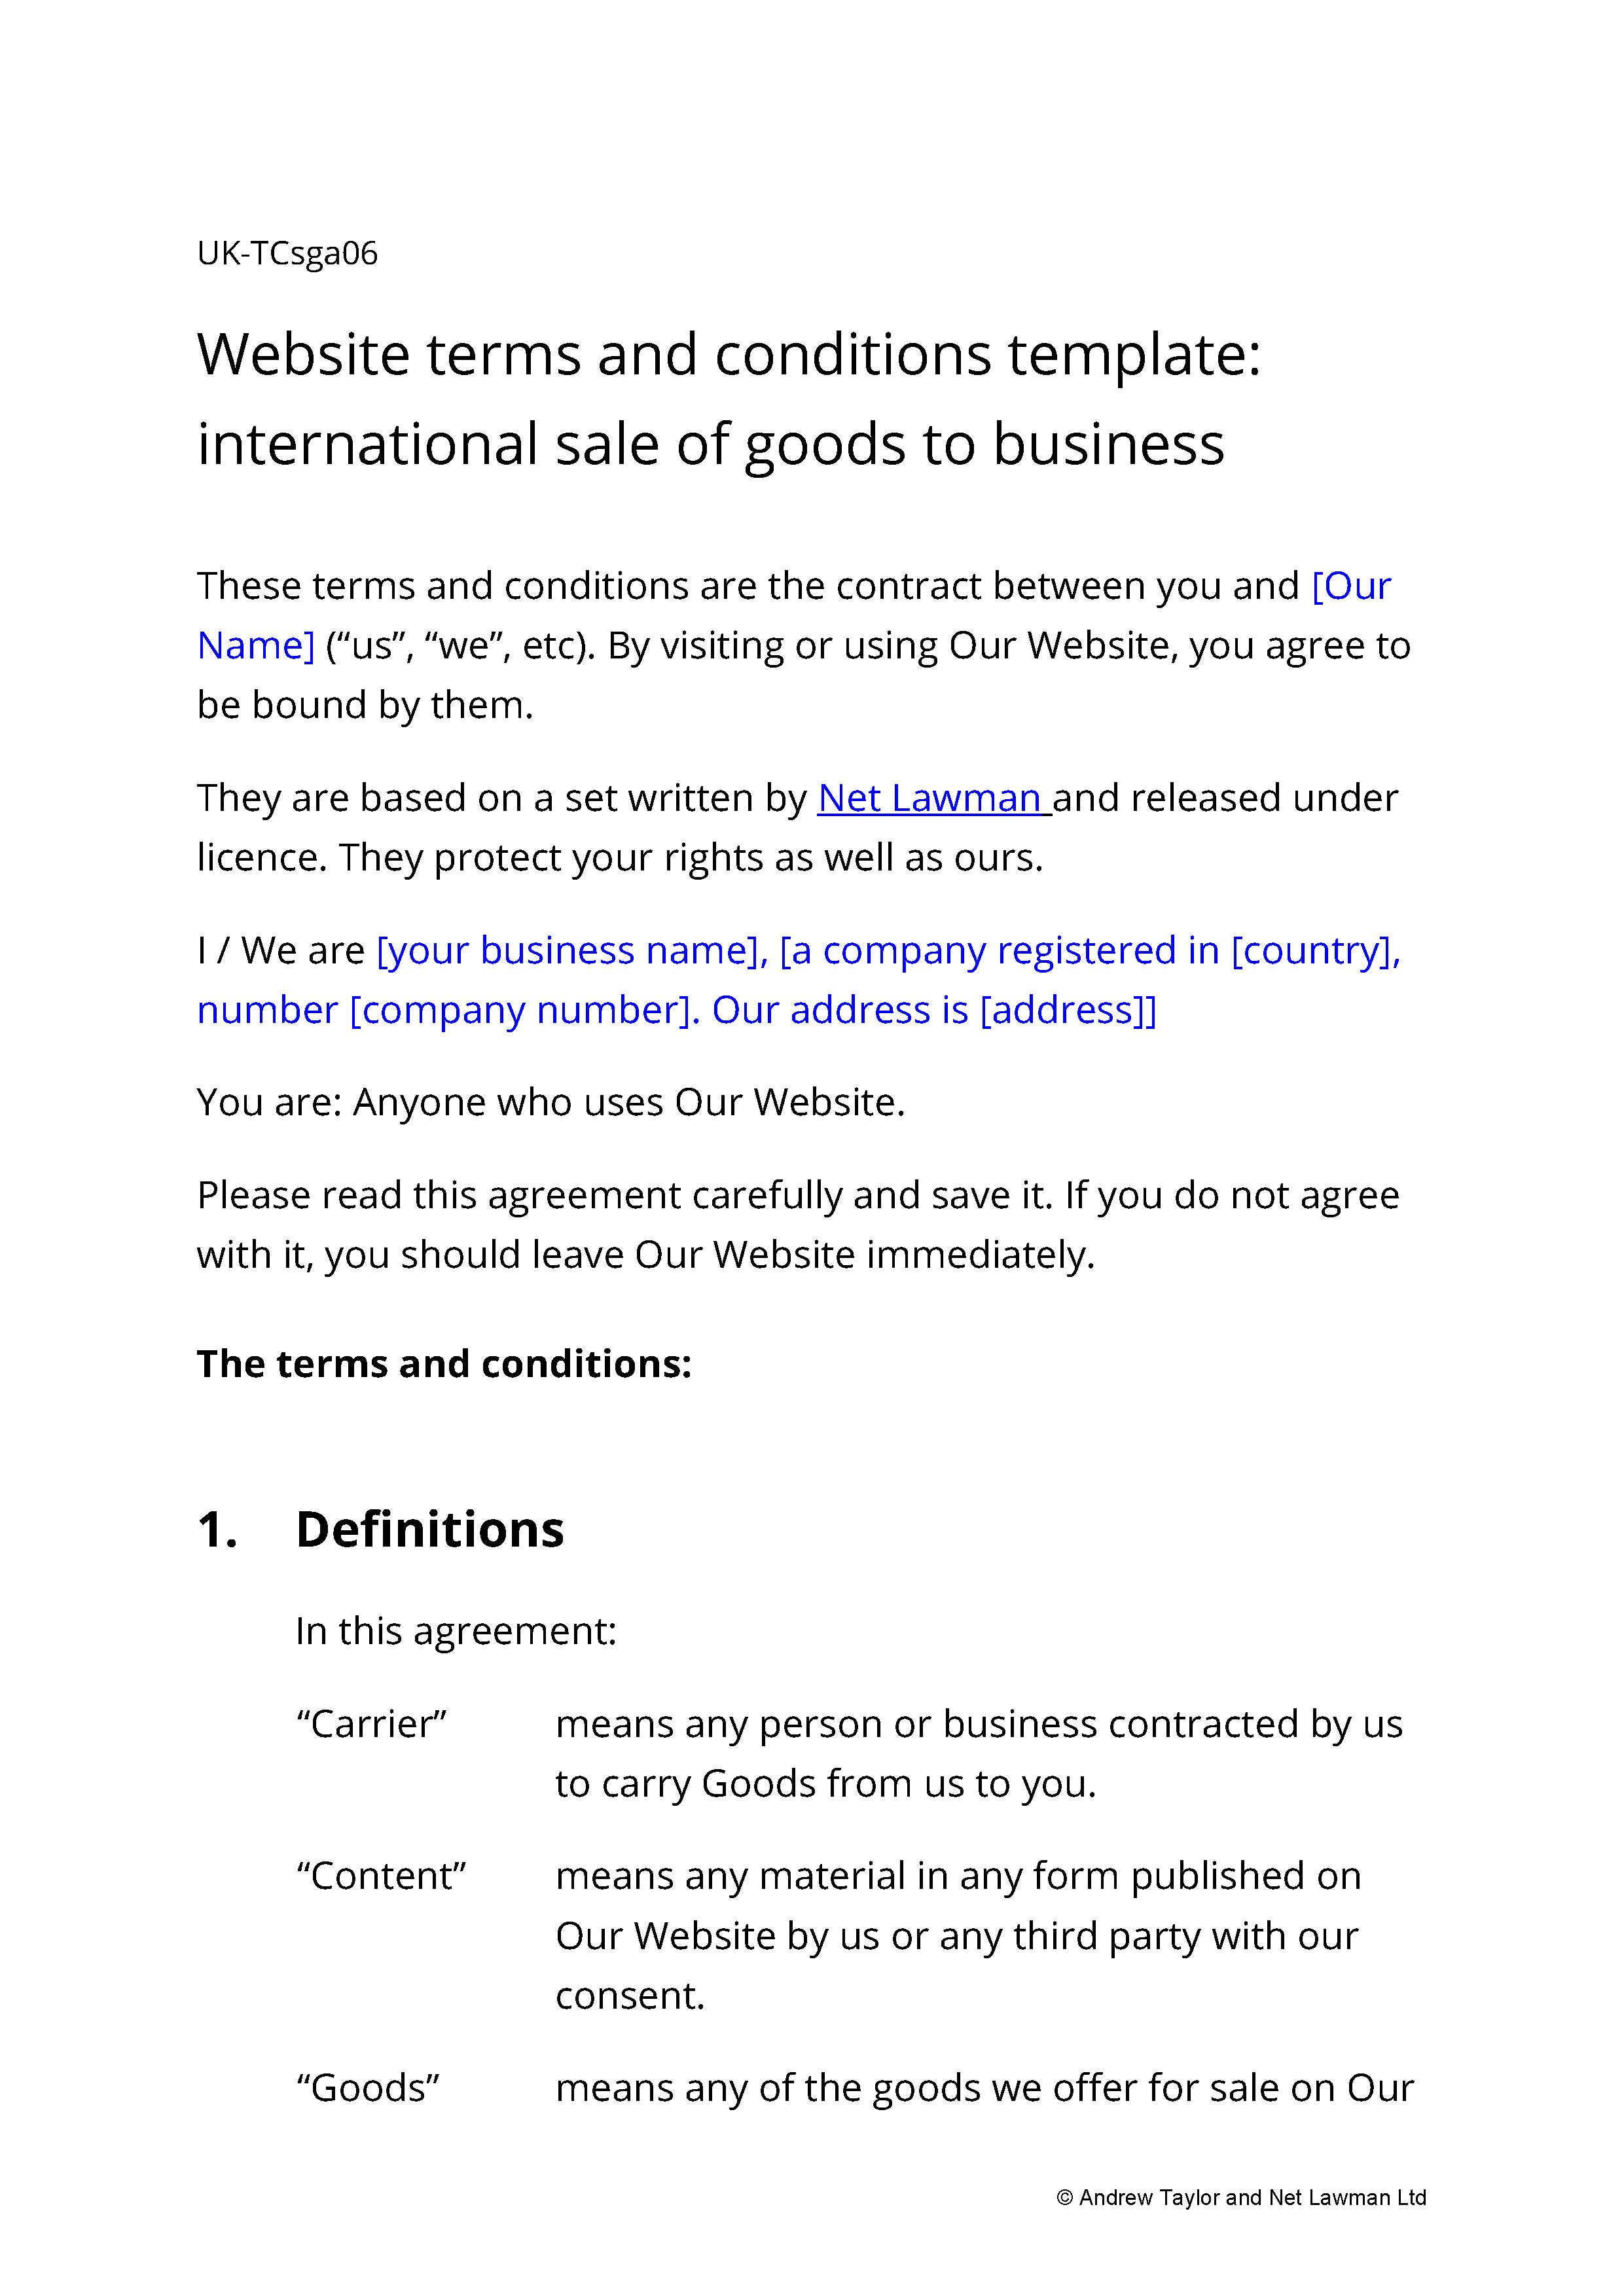 Sample page from the website termsfor a B2B retailer